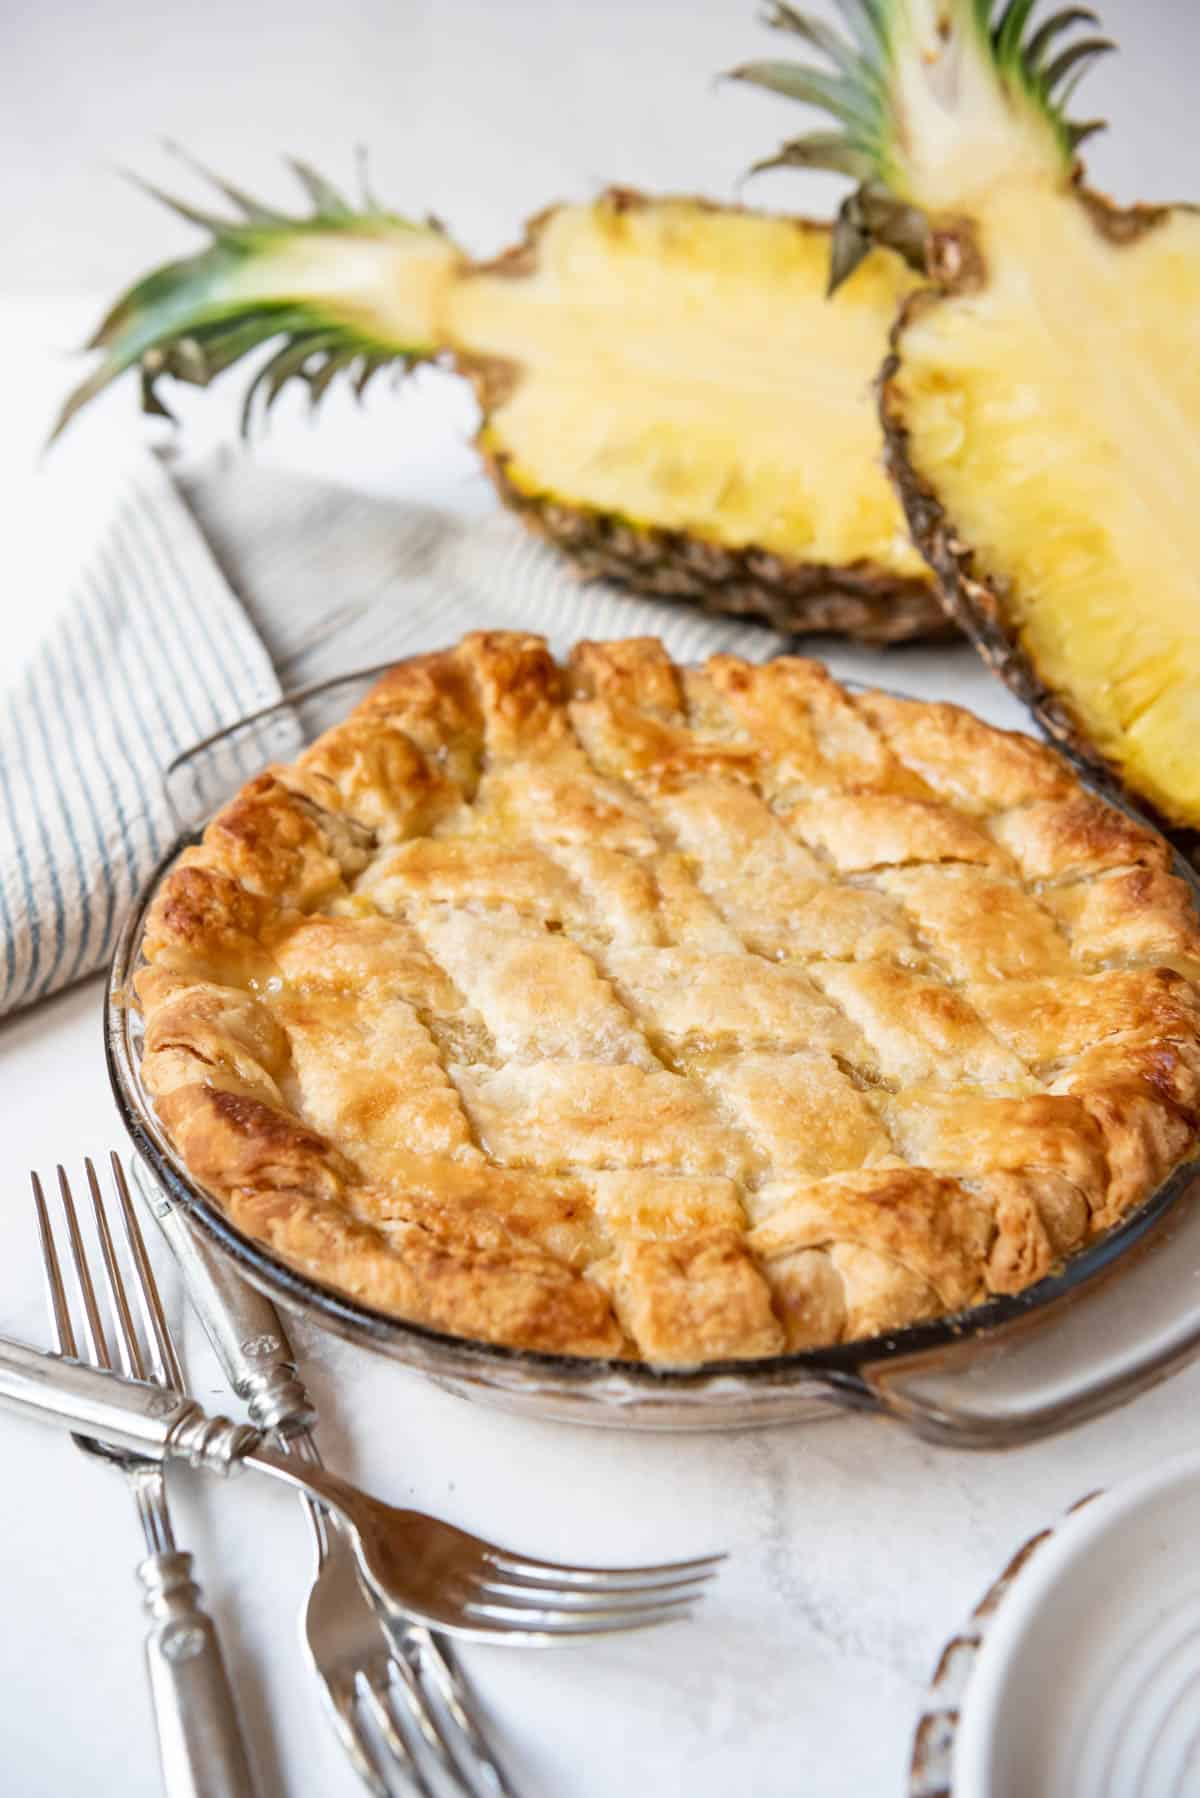 A double crust pineapple pie in a glass pie dish in front of two halves of a fresh pineapple.